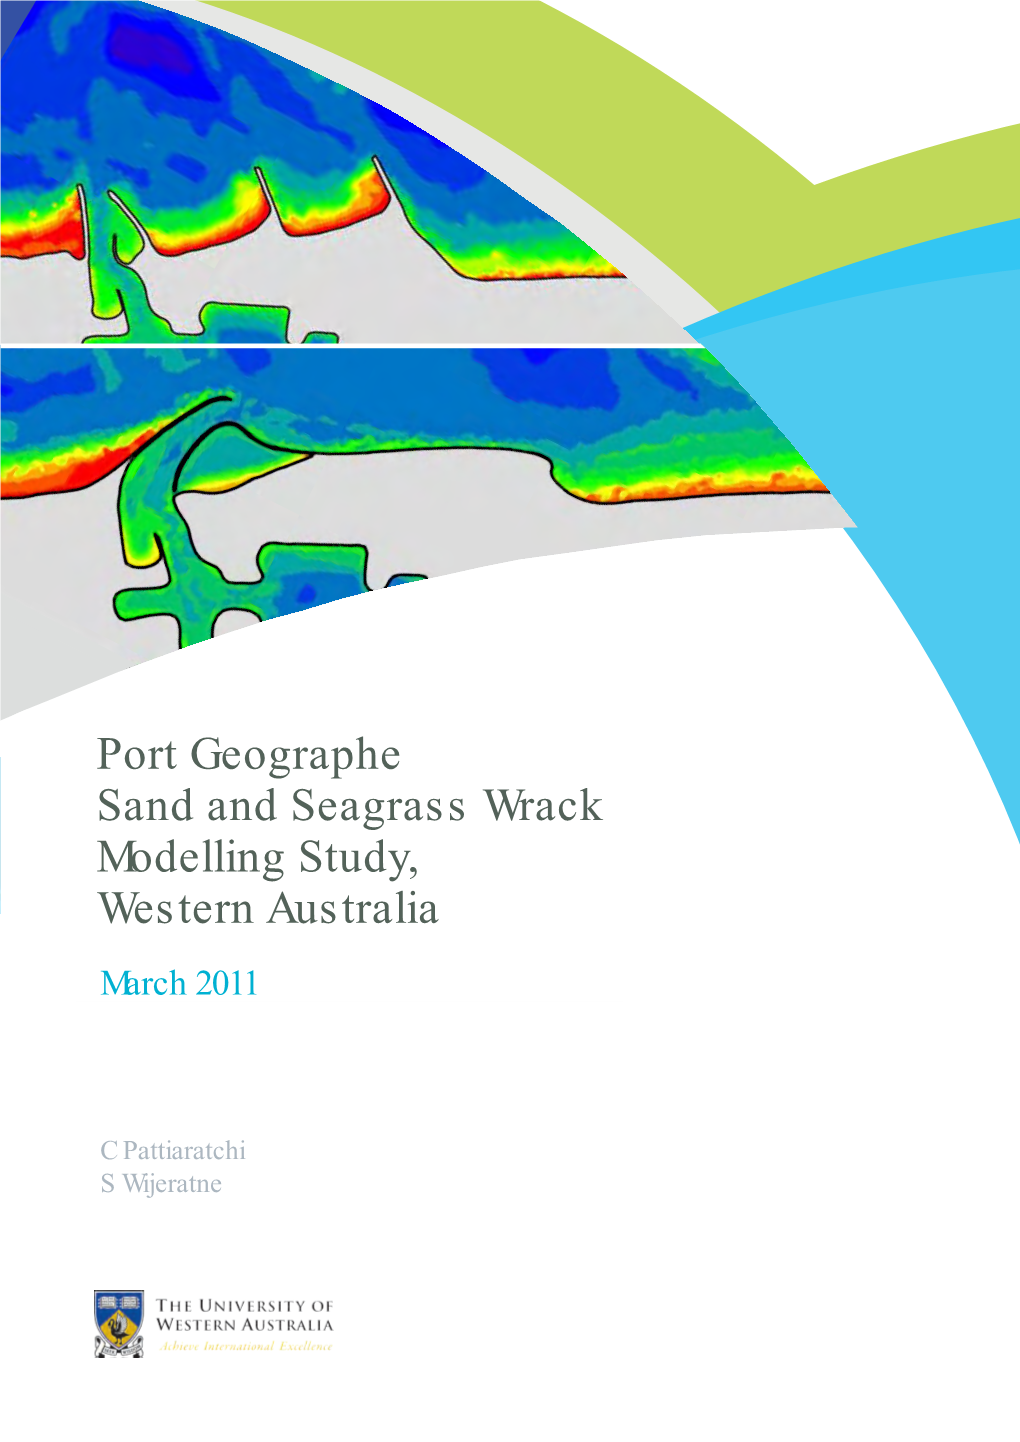 Port Geographe Sand and Seagrass Wrack Modelling Study, Western